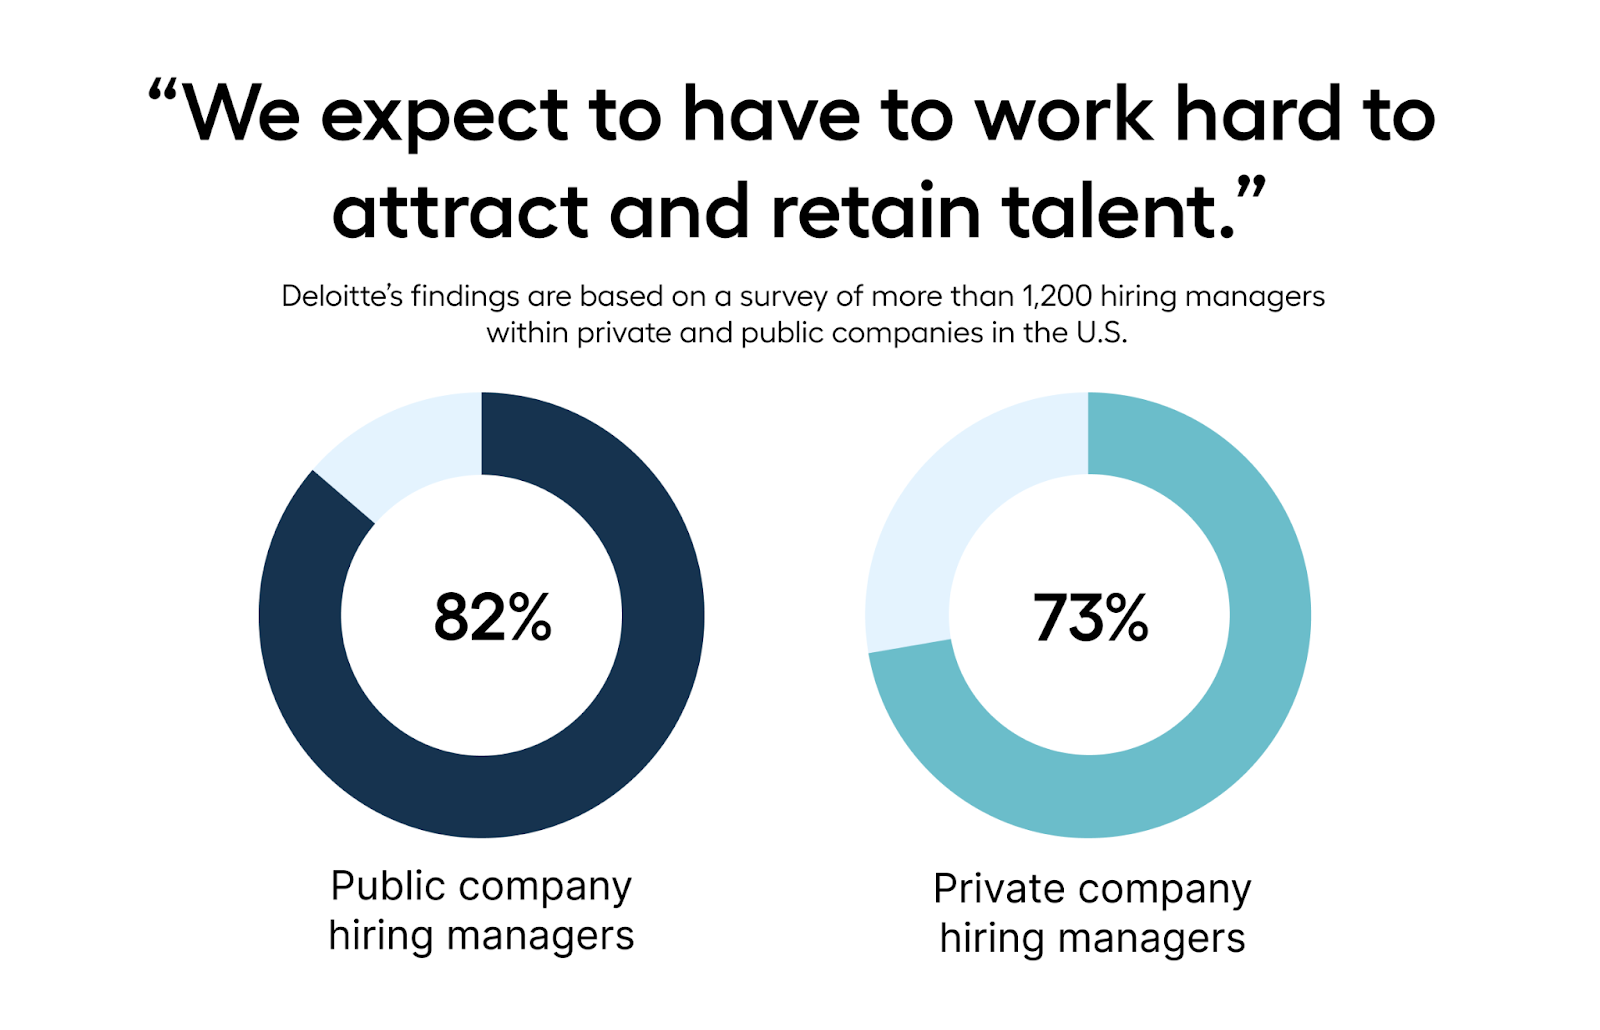 a chart showing public and private companies’ indications of feeling challenged to attract and retain talent.